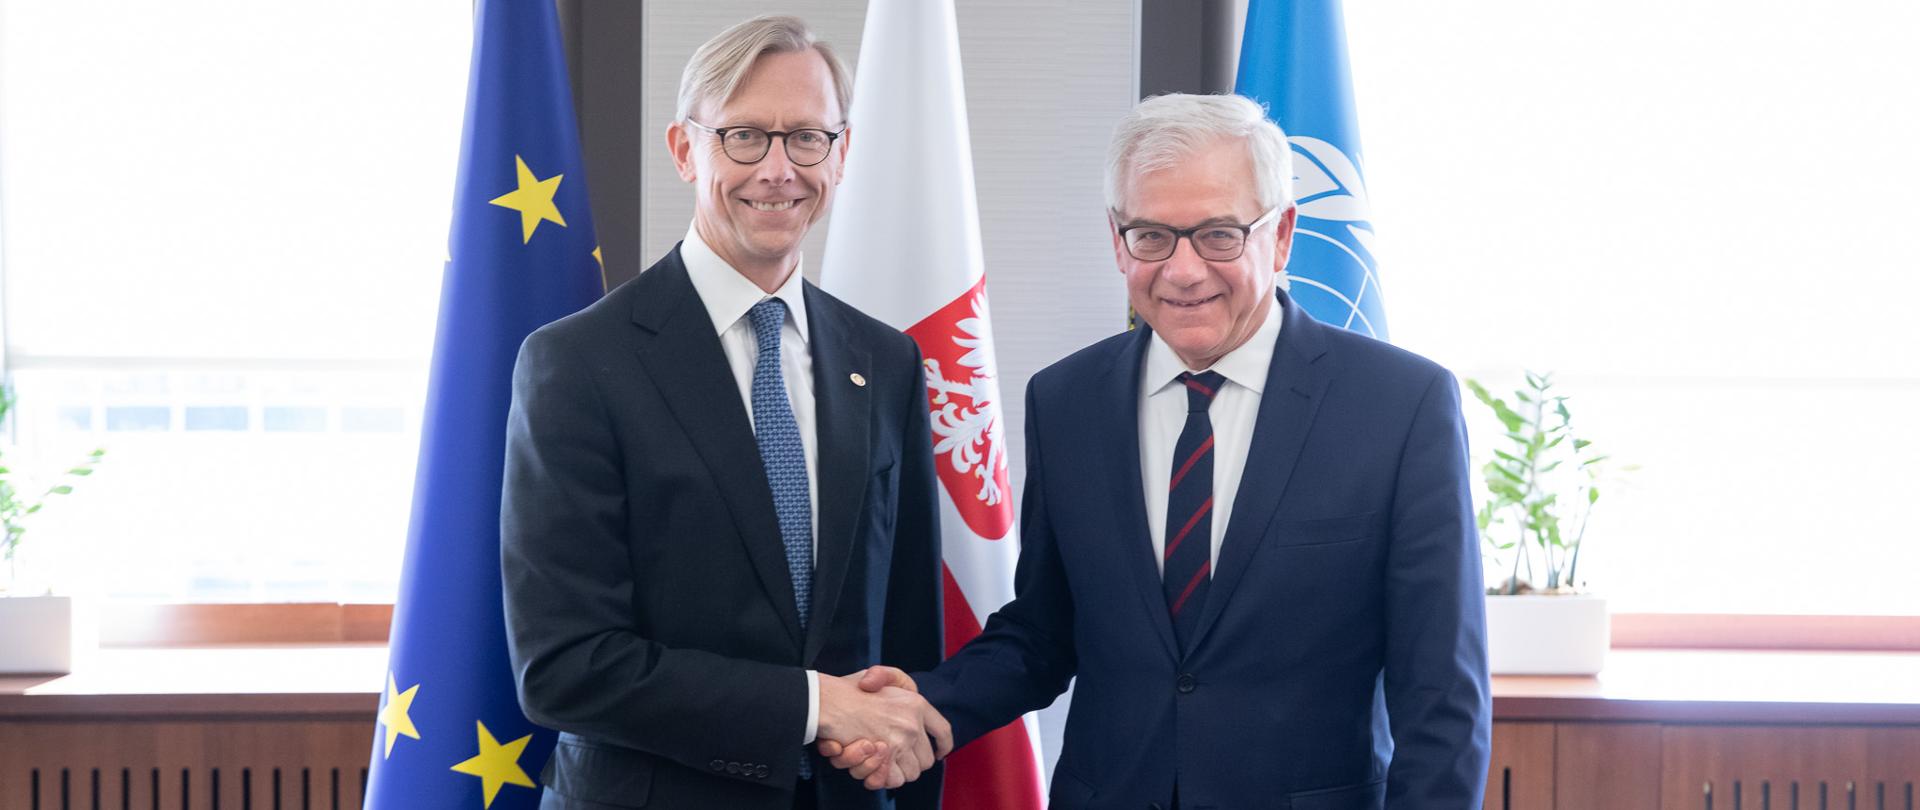 Minister Jacek Czaputowicz continues his visit to New York